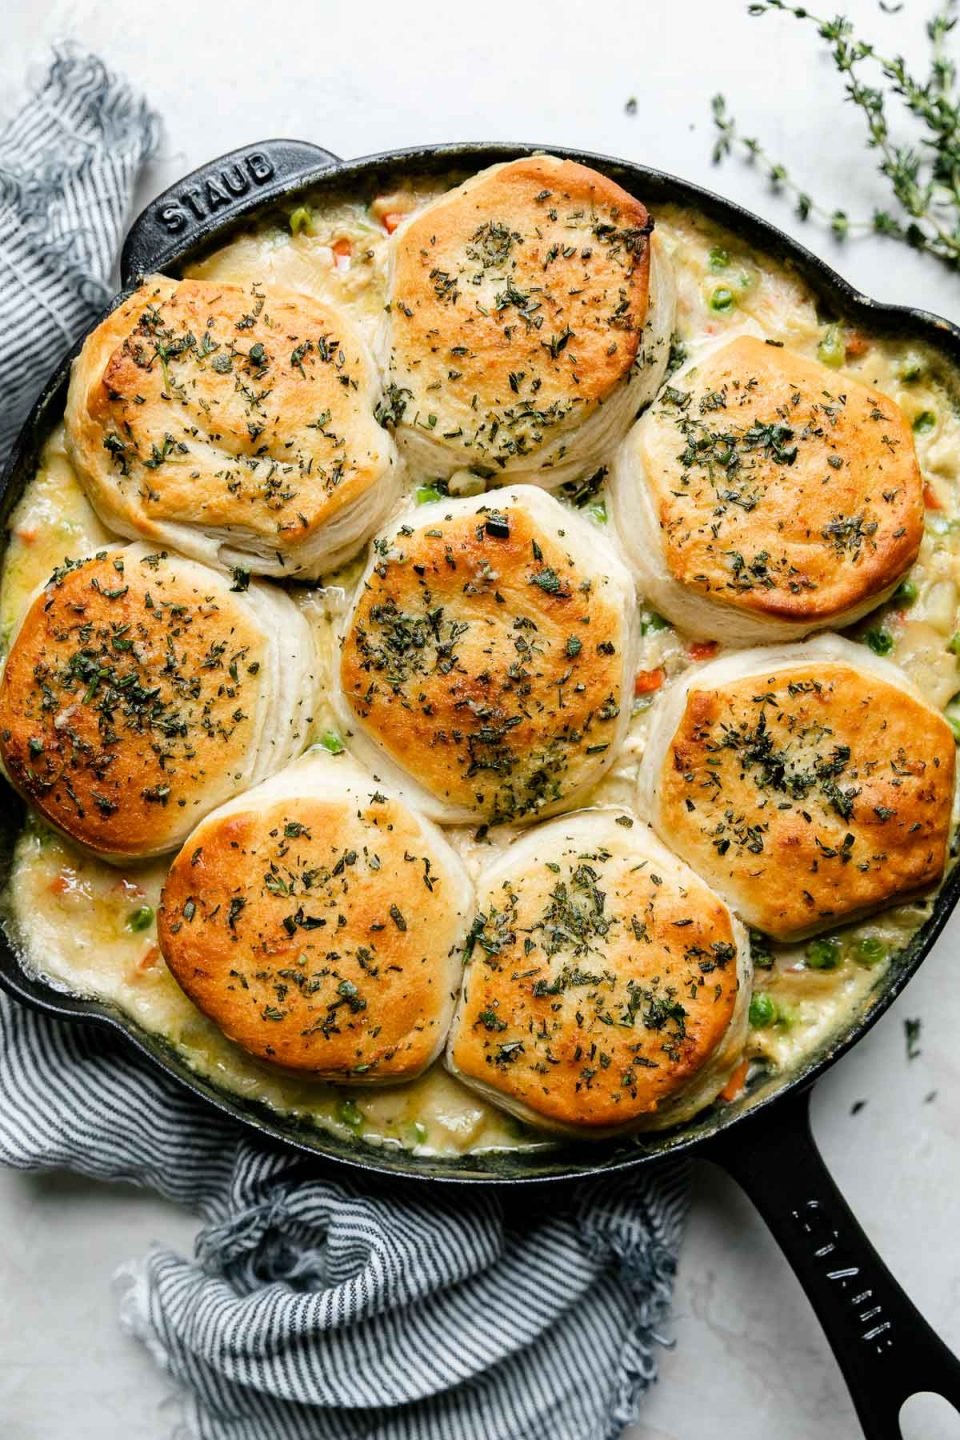 An overhead shot of Skillet Chicken Pot Pie with Biscuits in a black Staub cast iron skillet that sits atop a creamy white textured surface. A blue and white striped linen napkin rests alongside the skillet and sprigs of fresh thyme also surround the skillet.